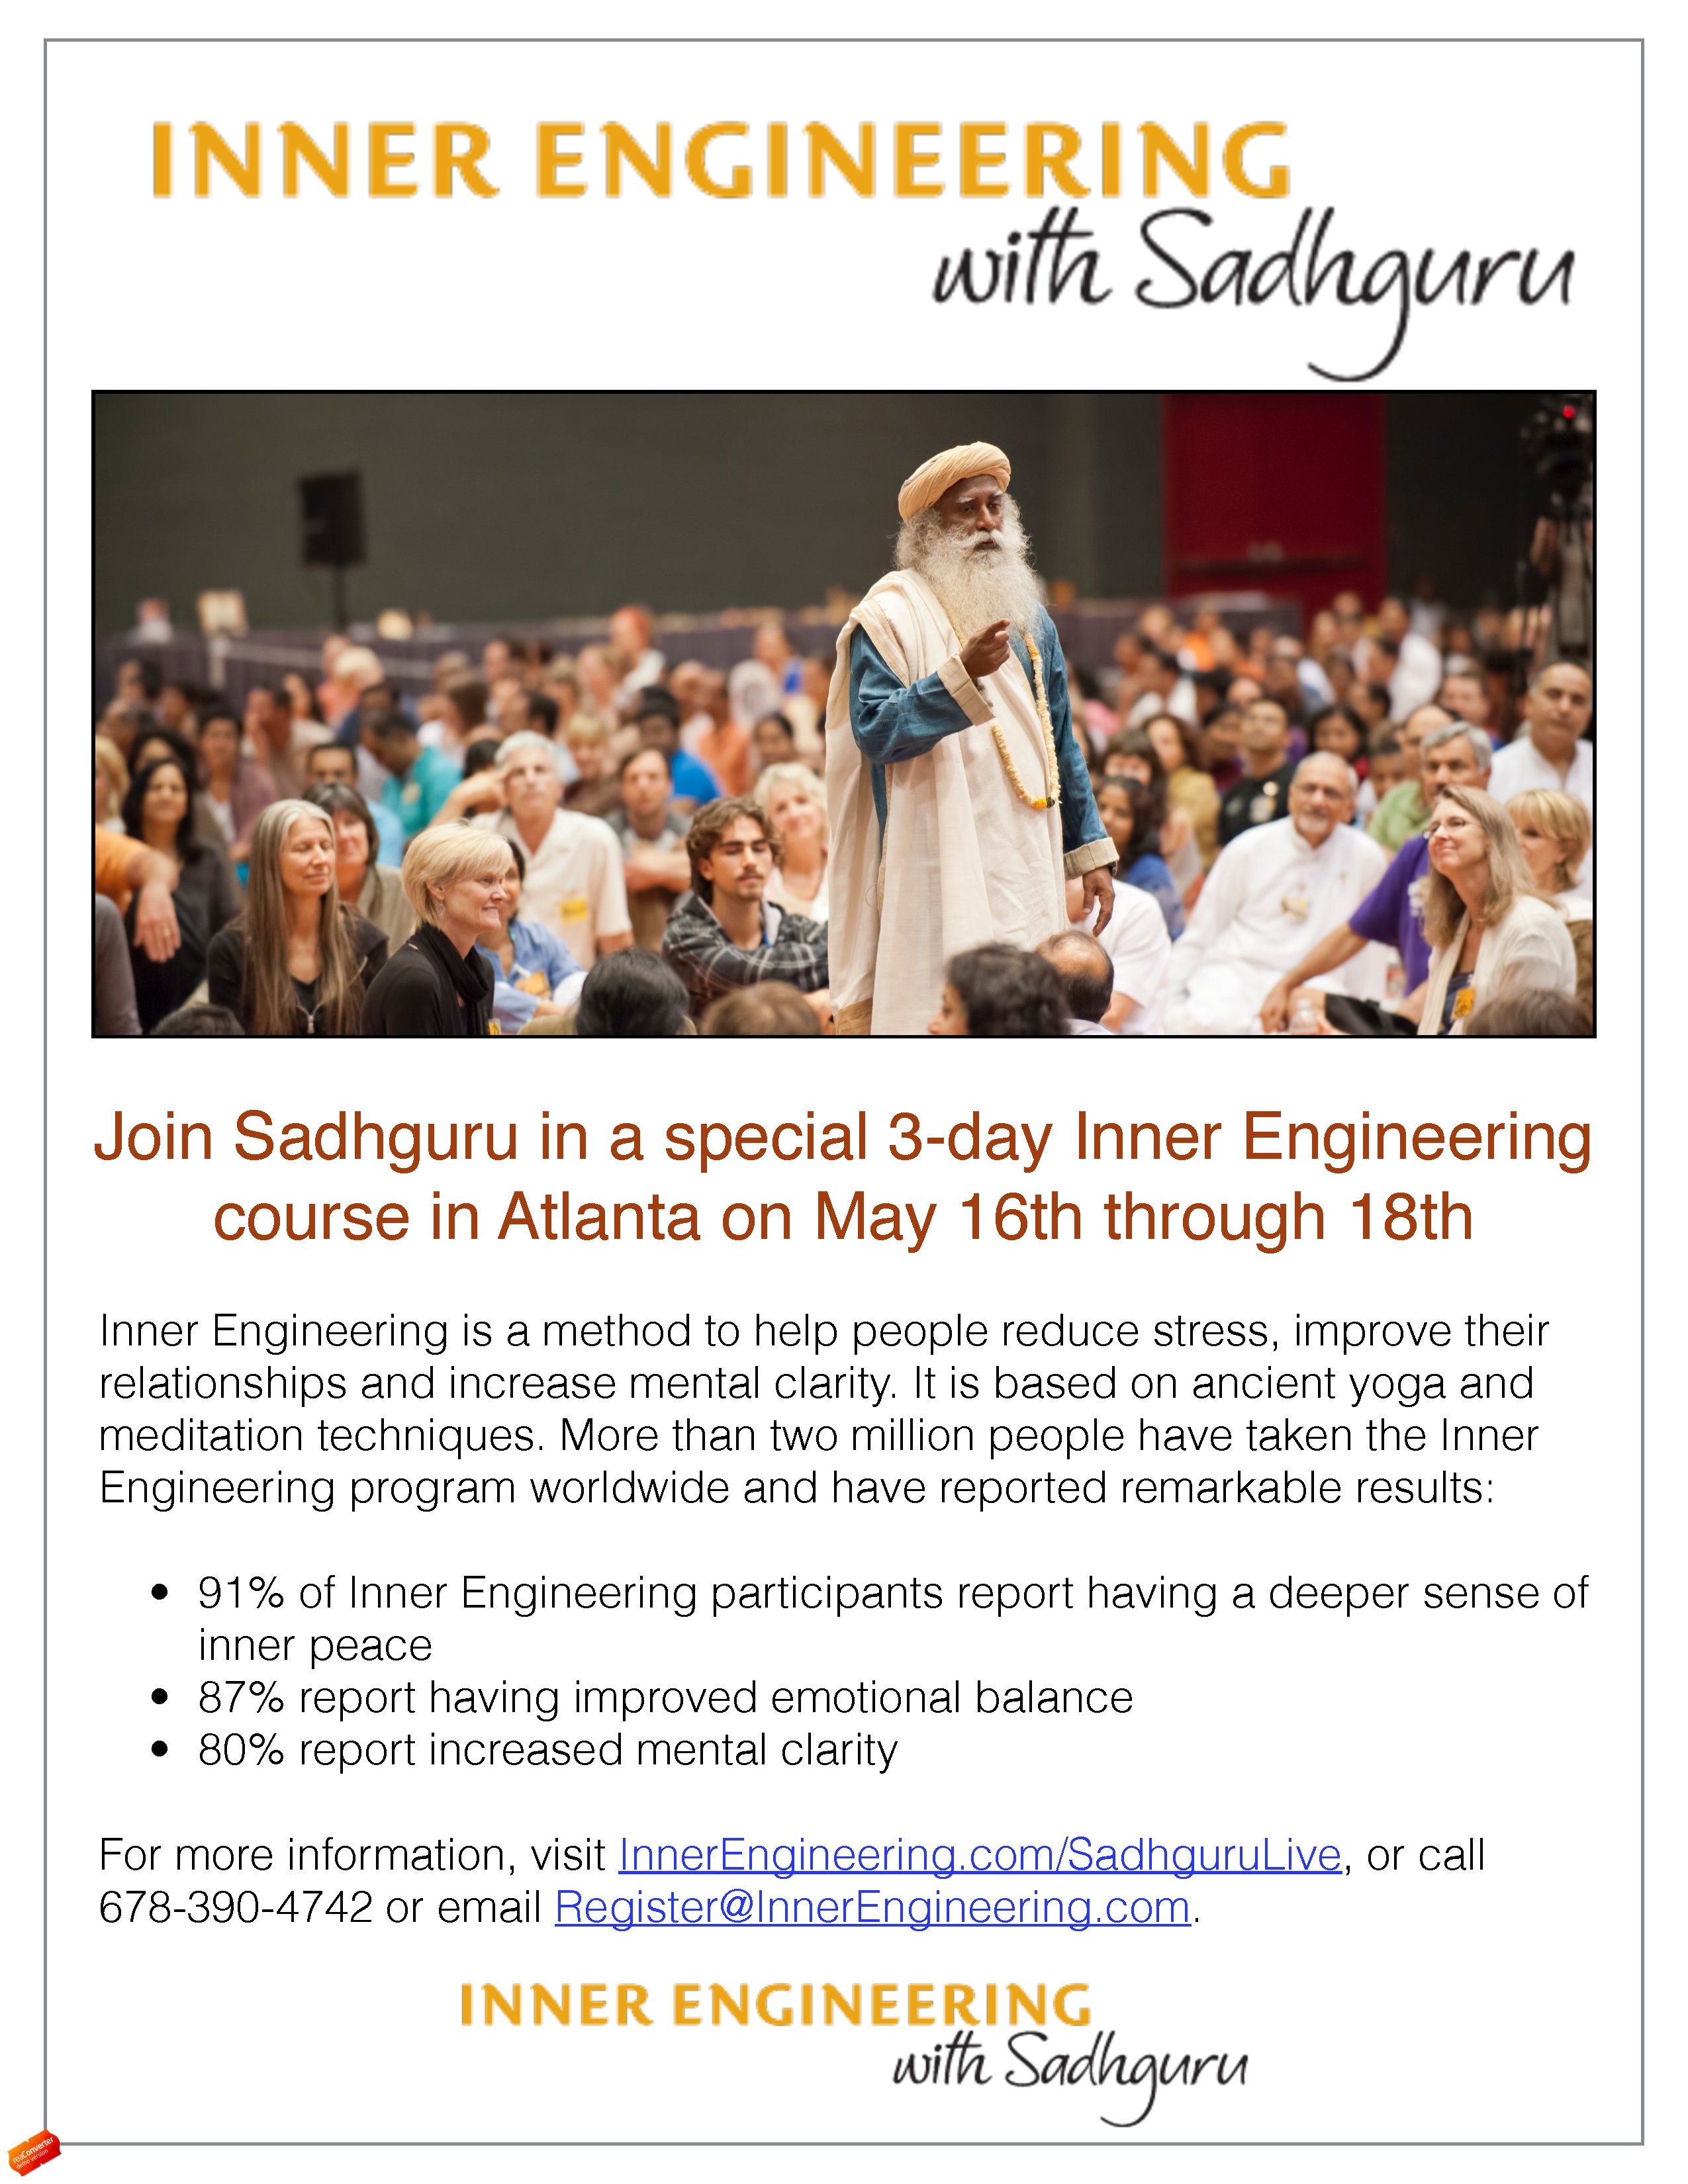 Information about the 3-day Inner Engineering Workshop in Atlanta on May 16-18